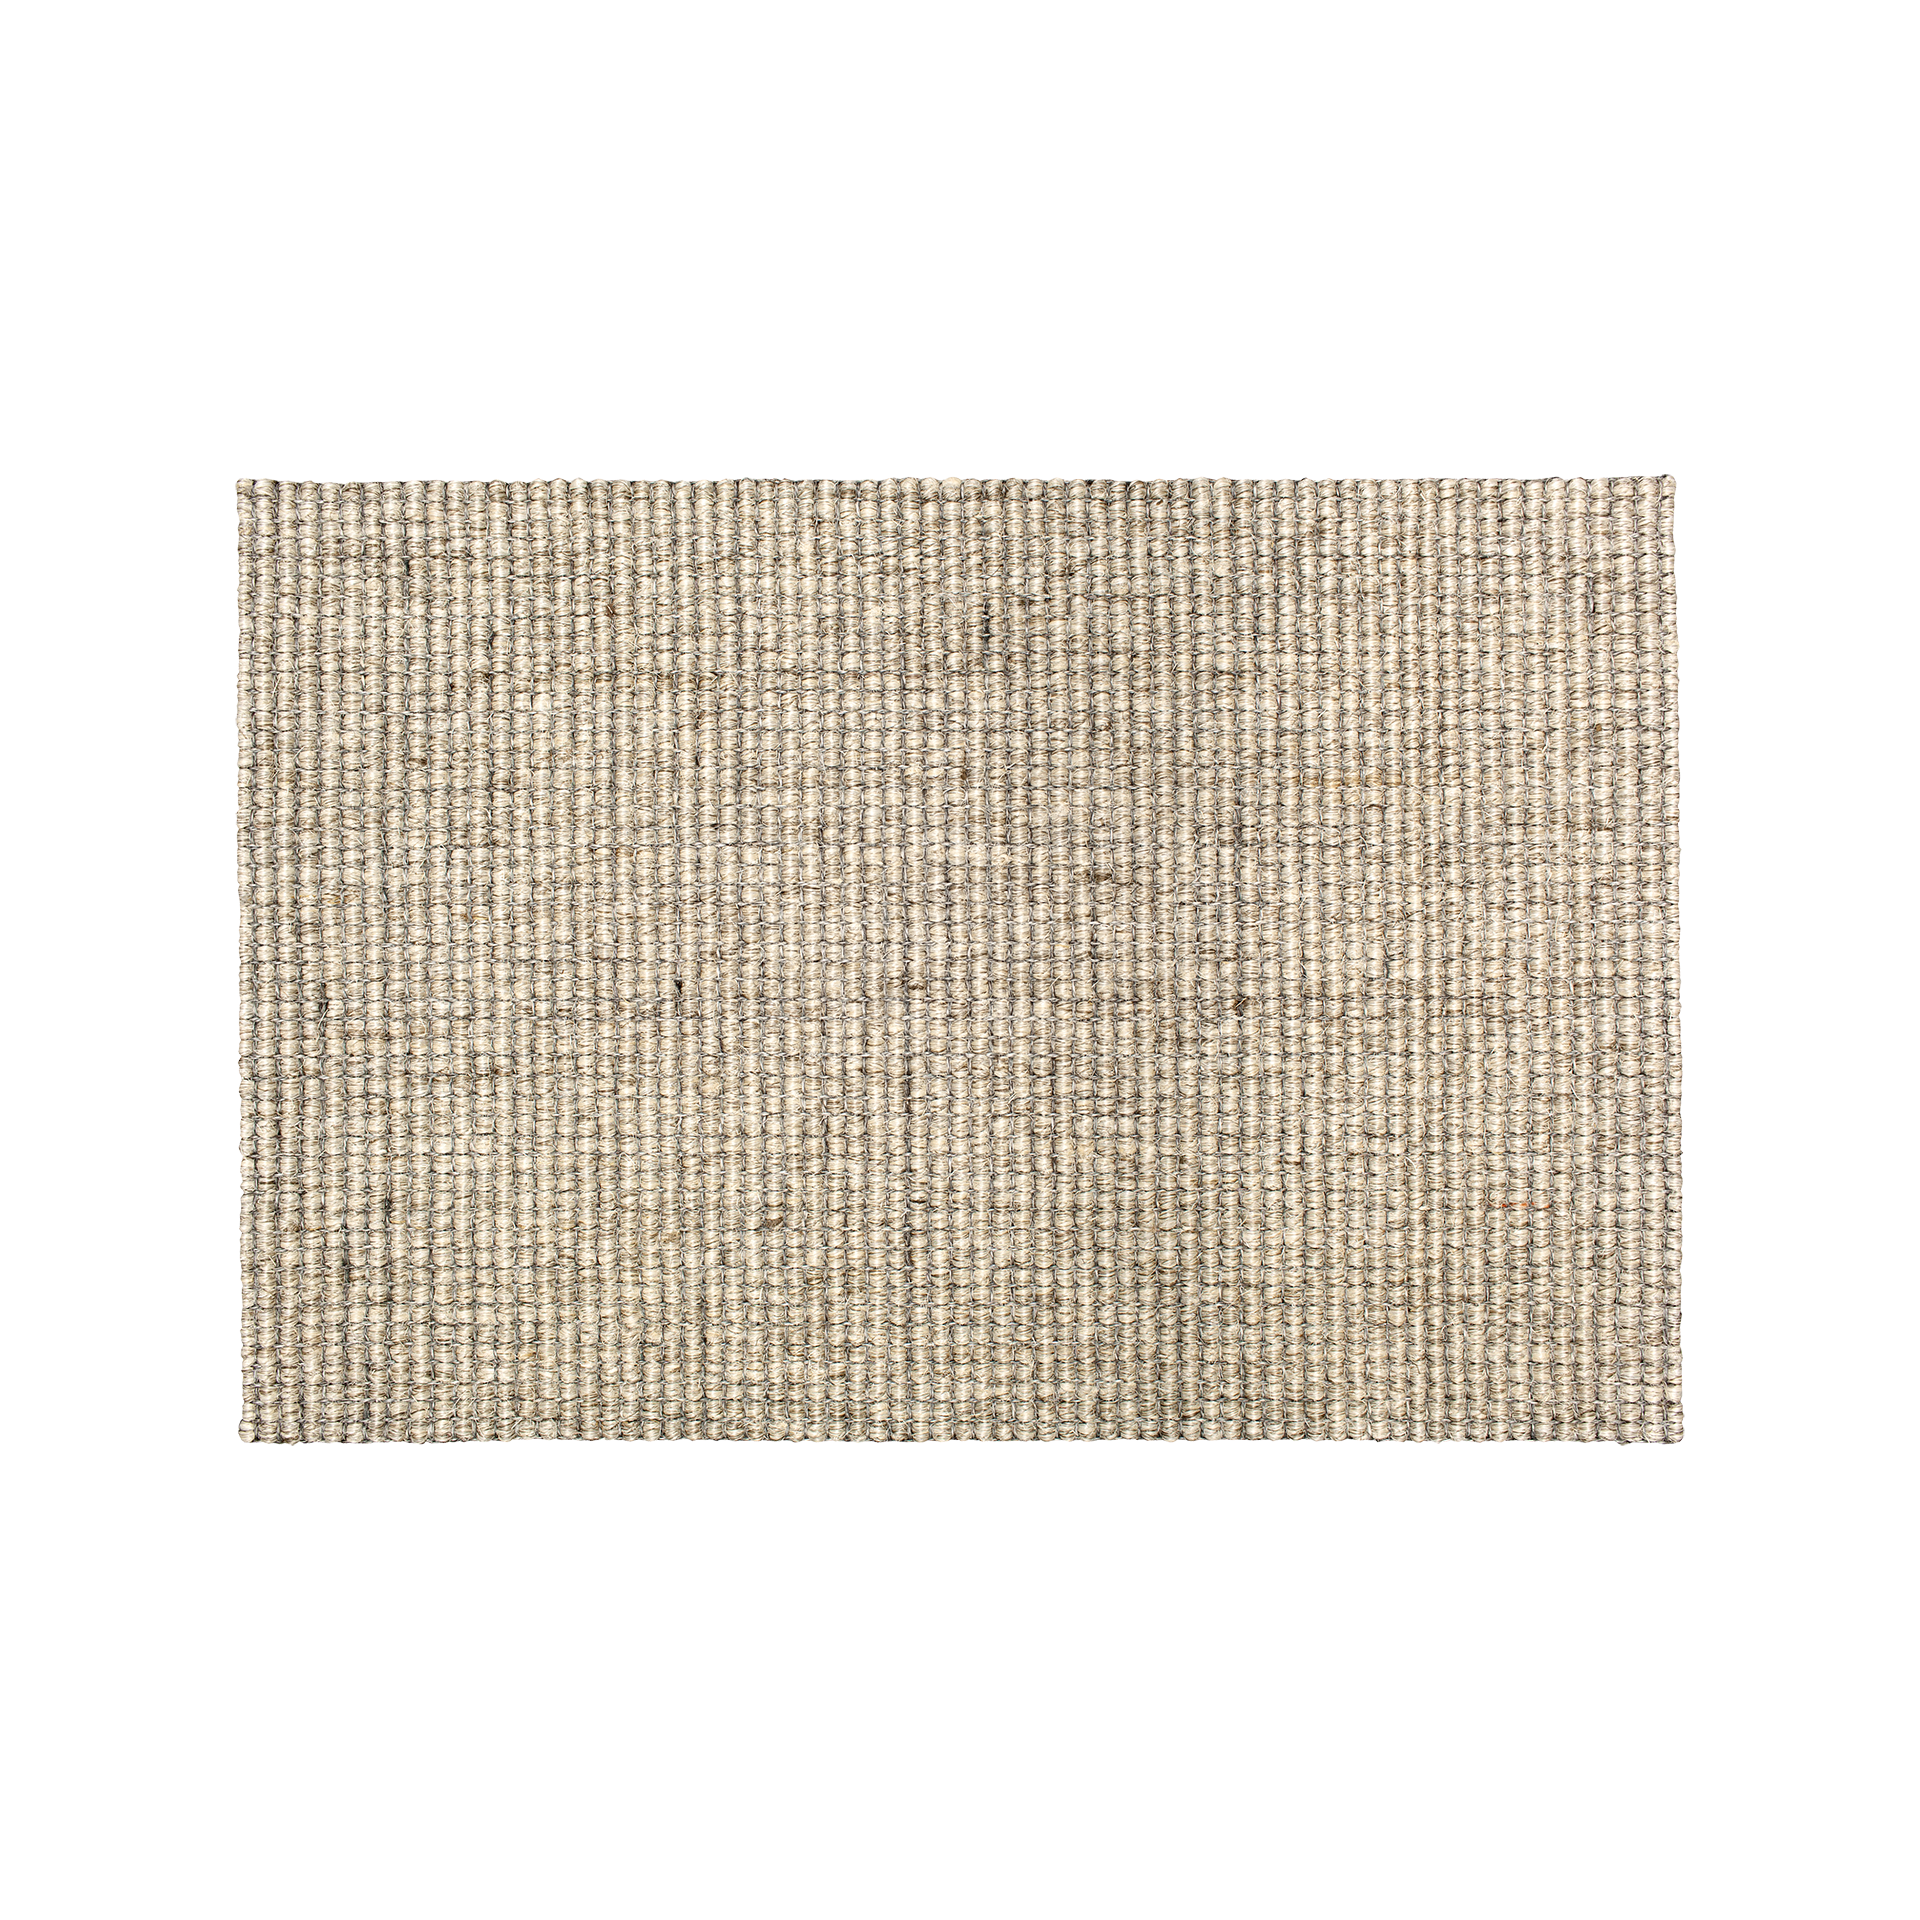 Sand-colored doormat Astrid, made of sisal